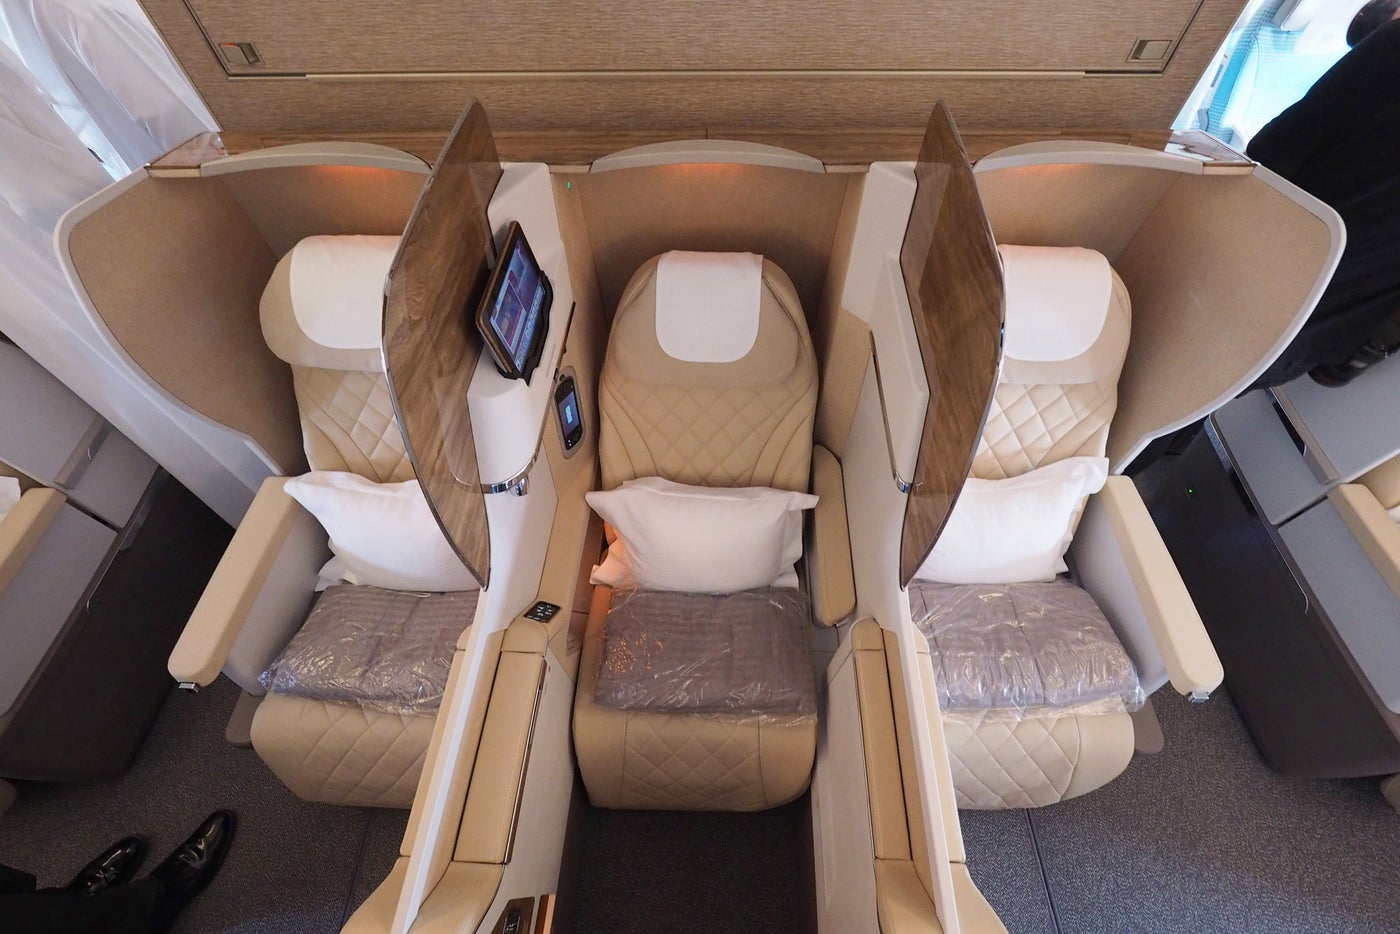 Check Out Emirates First 777 With The New Biz Class Seats 8078